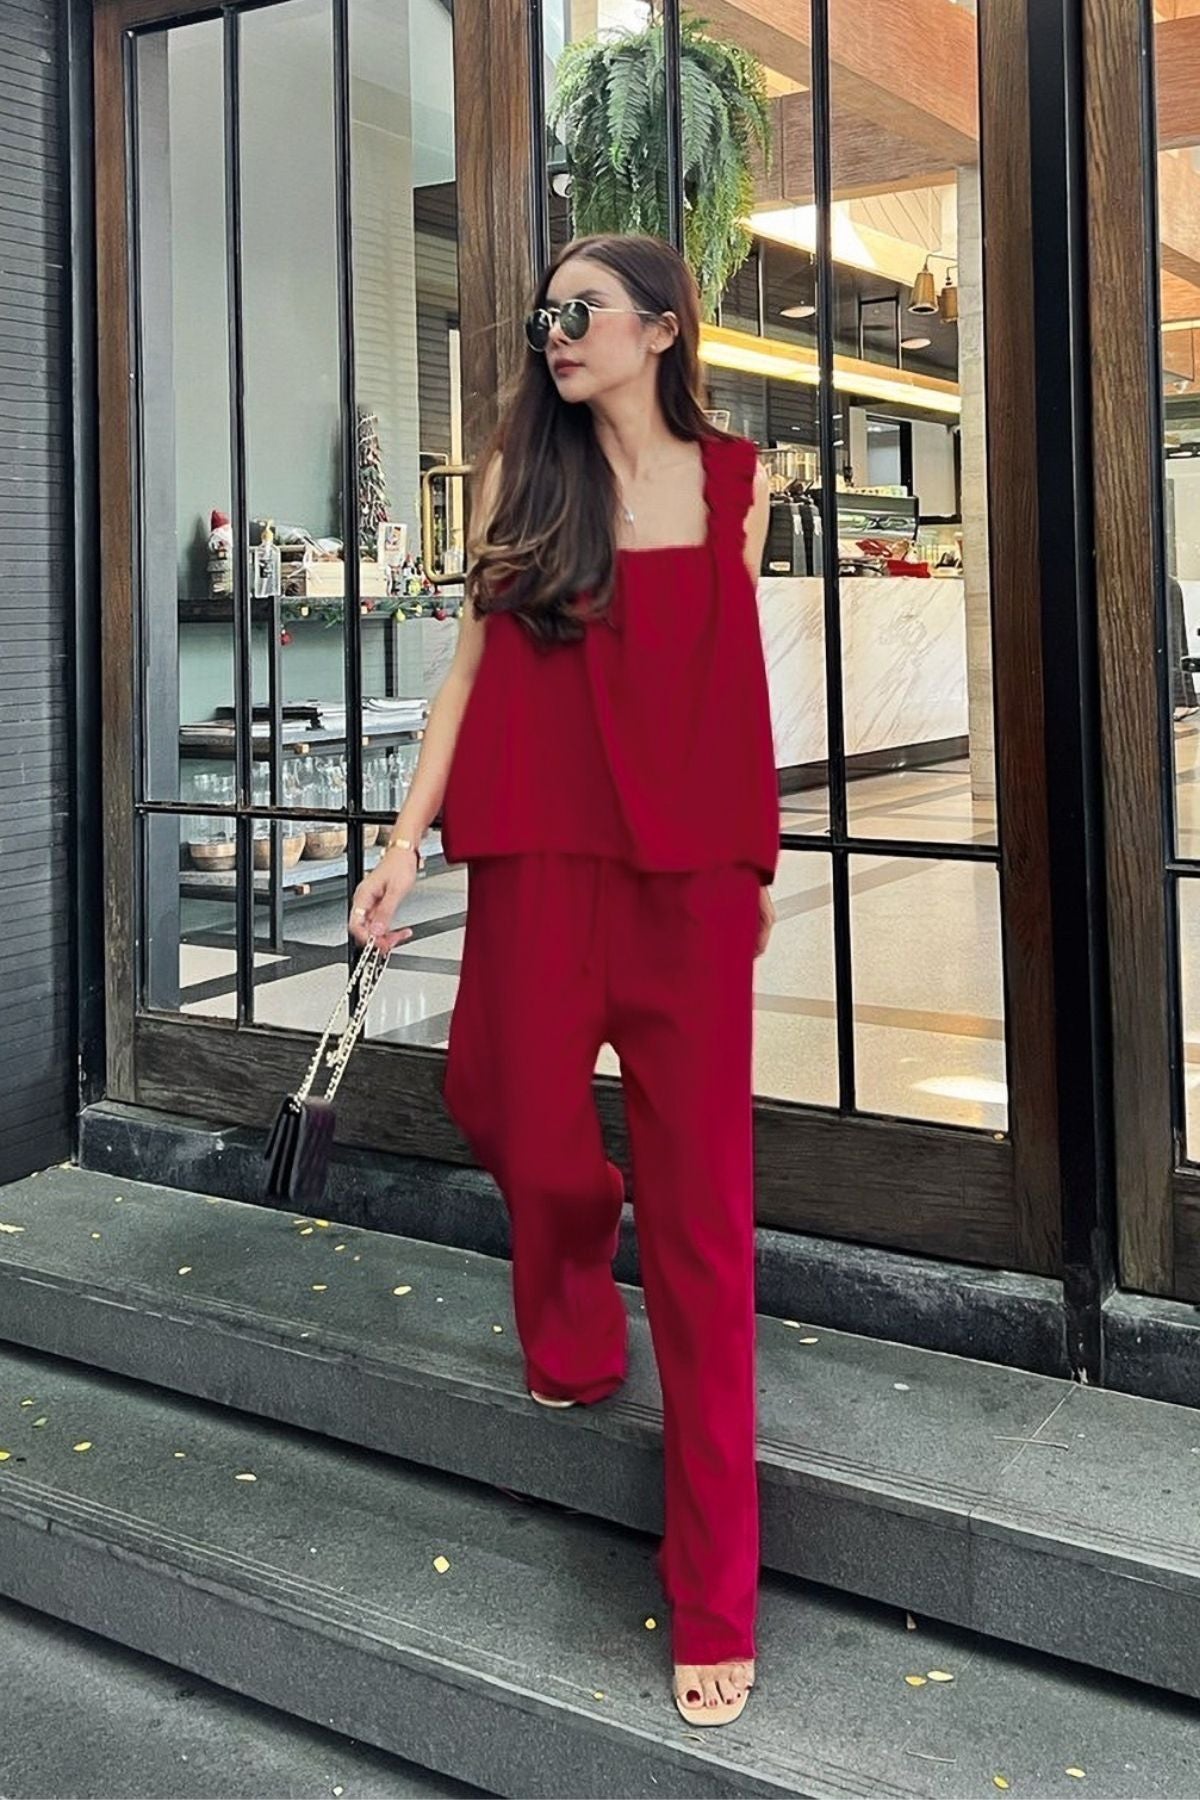 SHELBY Square-Neck Sleeveless Top & Pants Co-ord (Red)